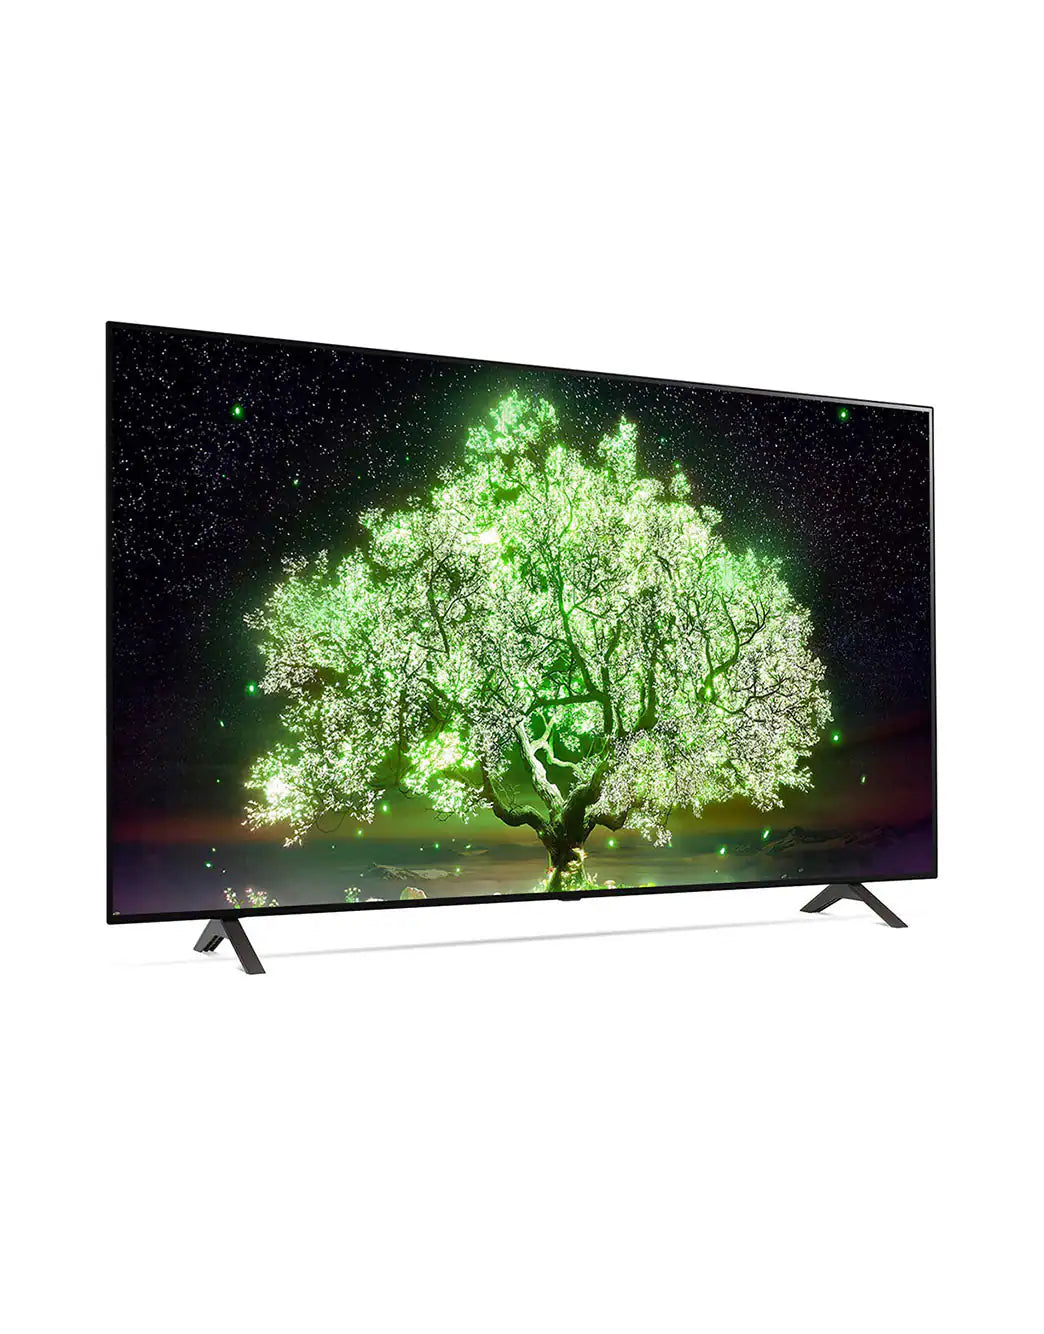 LG OLED TV 65 Inch A1 Series, 4K Cinema HDR WebOS Smart AI ThinQ Pixel Dimming